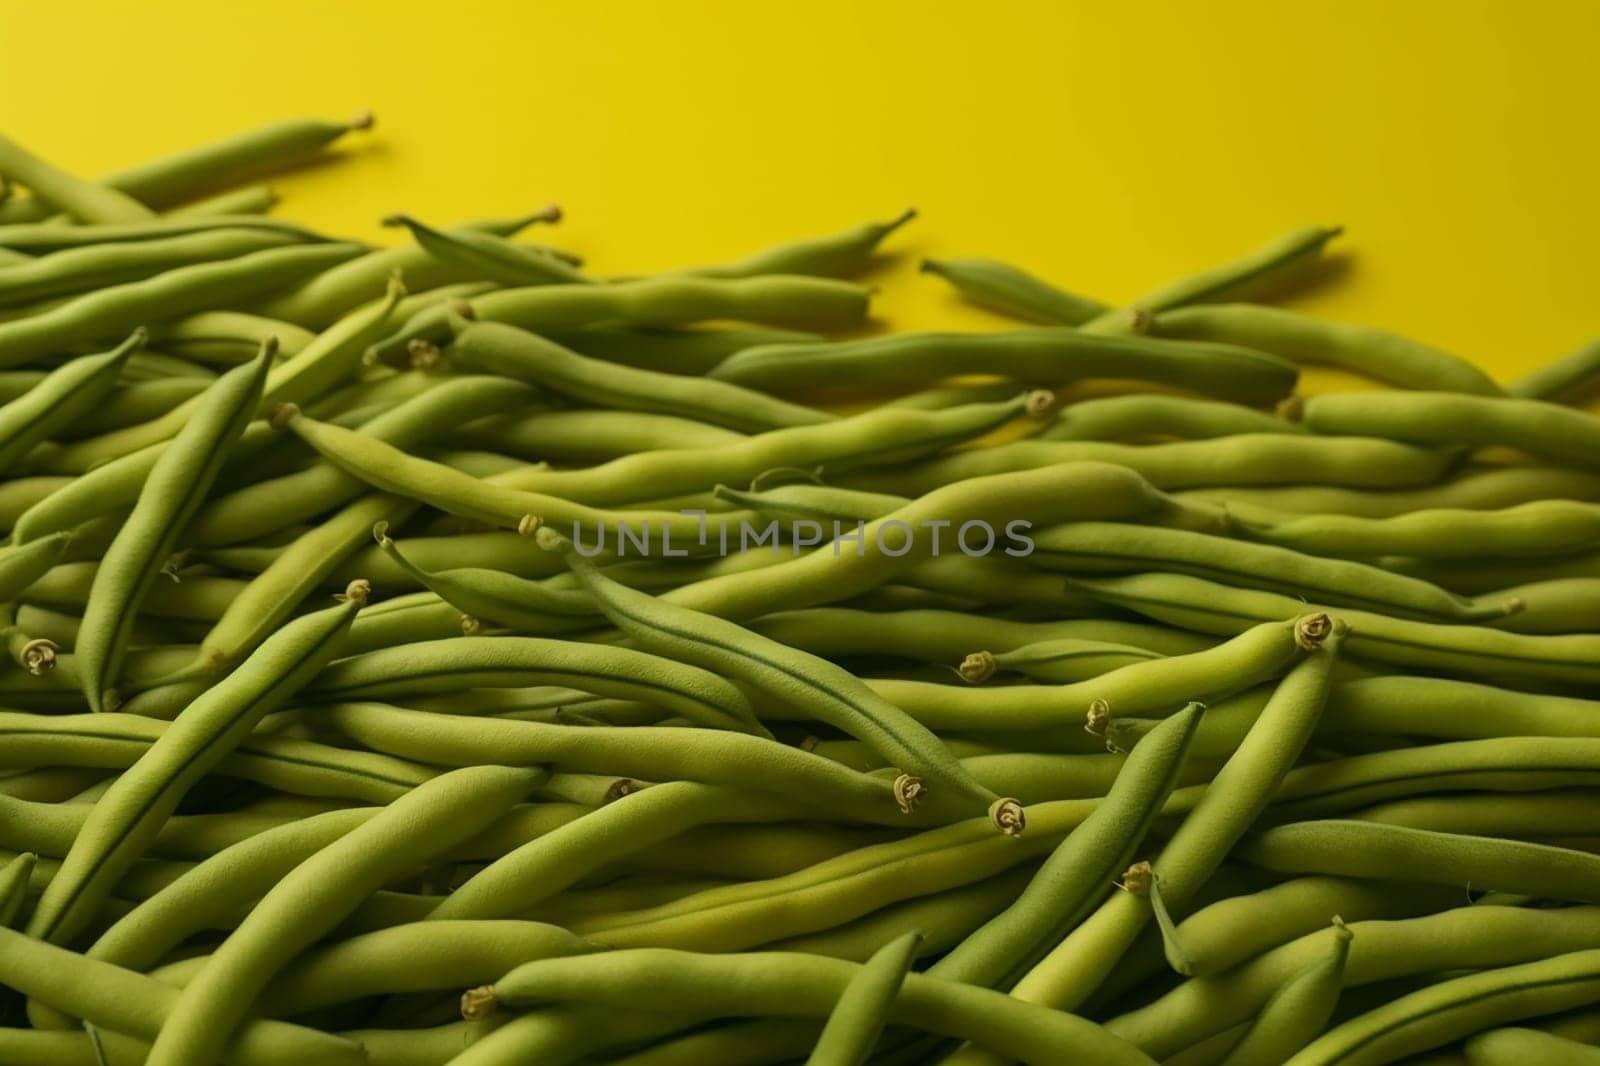 A pile of fresh green beans against a yellow background.